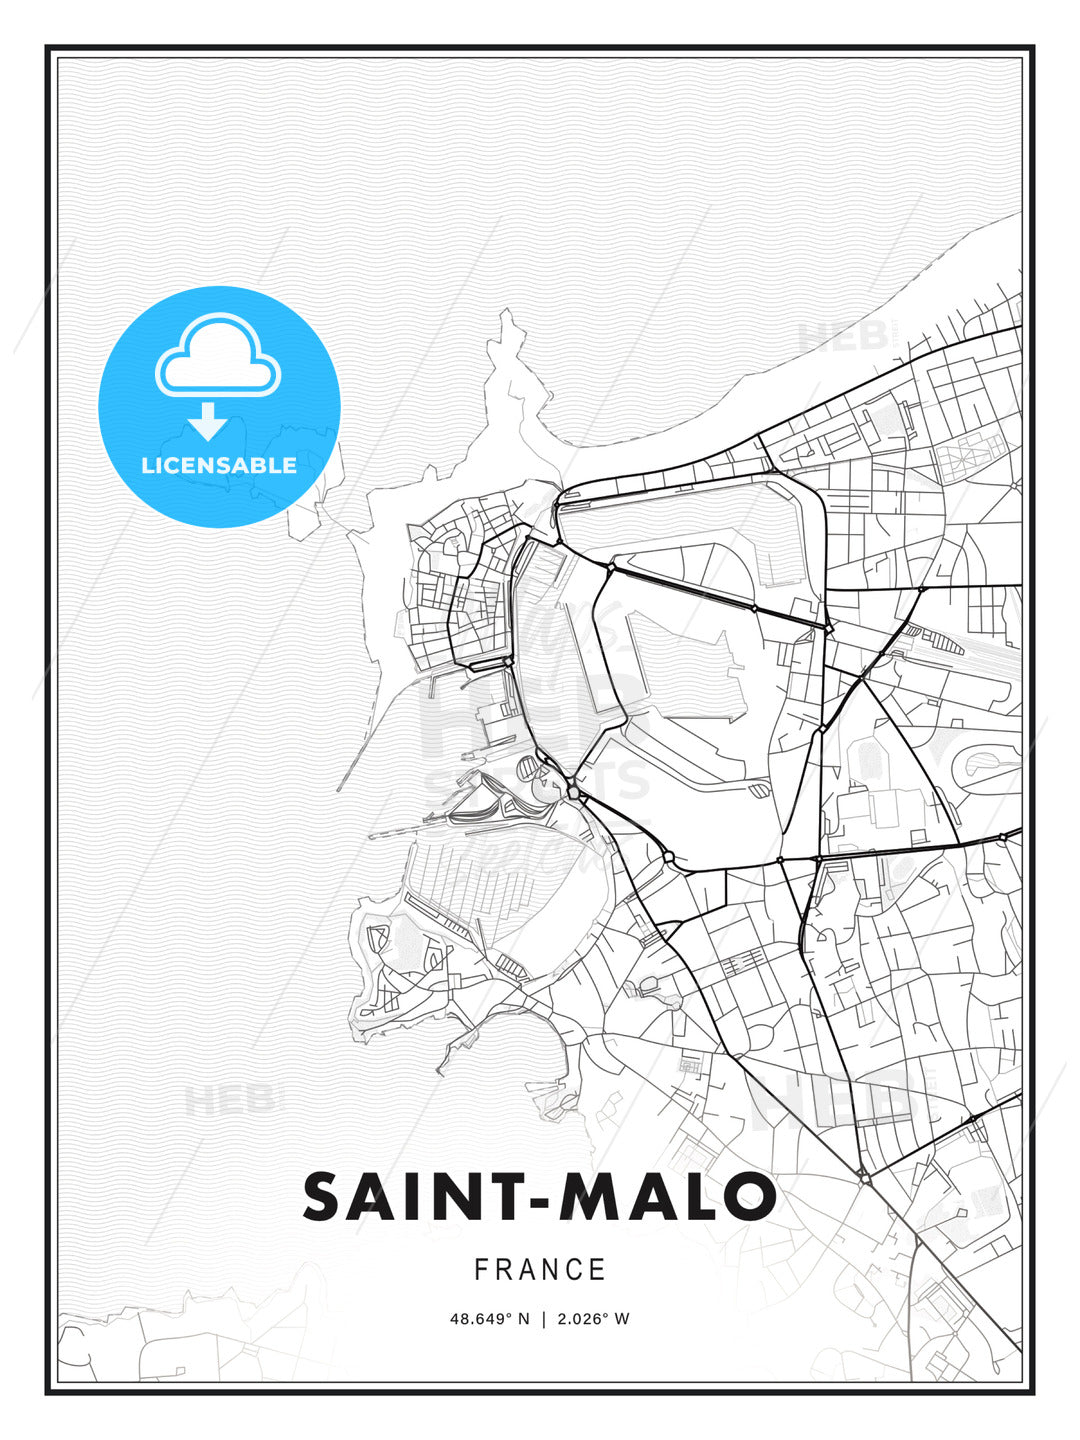 Saint-Malo, France, Modern Print Template in Various Formats - HEBSTREITS Sketches